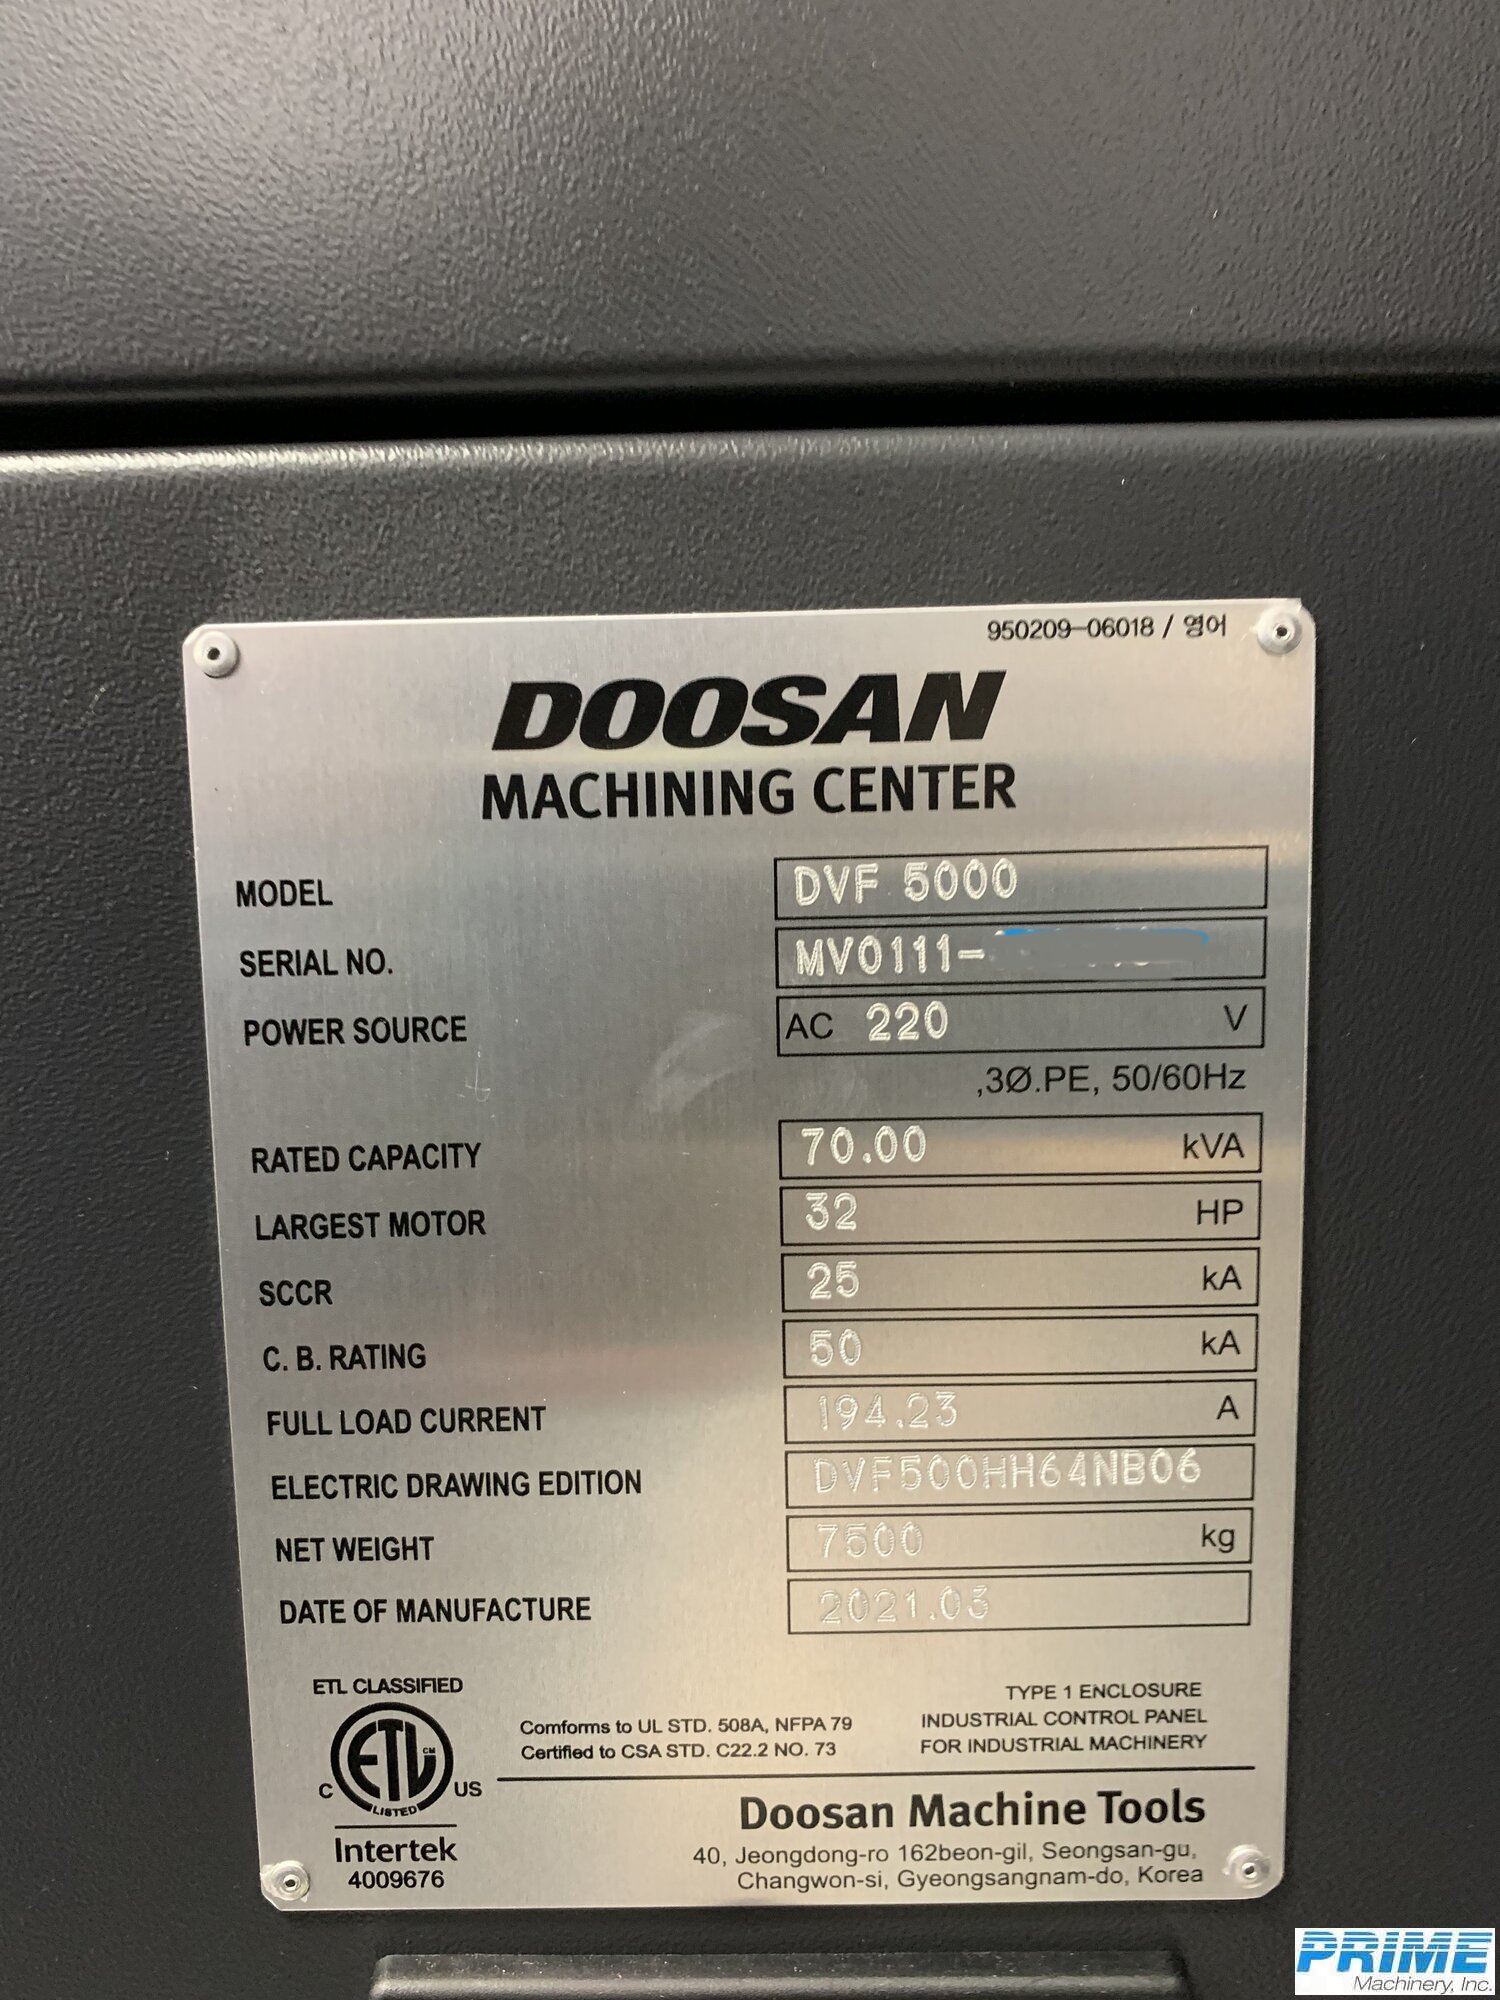 2021 DOOSAN DVF 5000 MACHINING CENTERS, VERICAL (5-Axis or More) | Prime Machinery